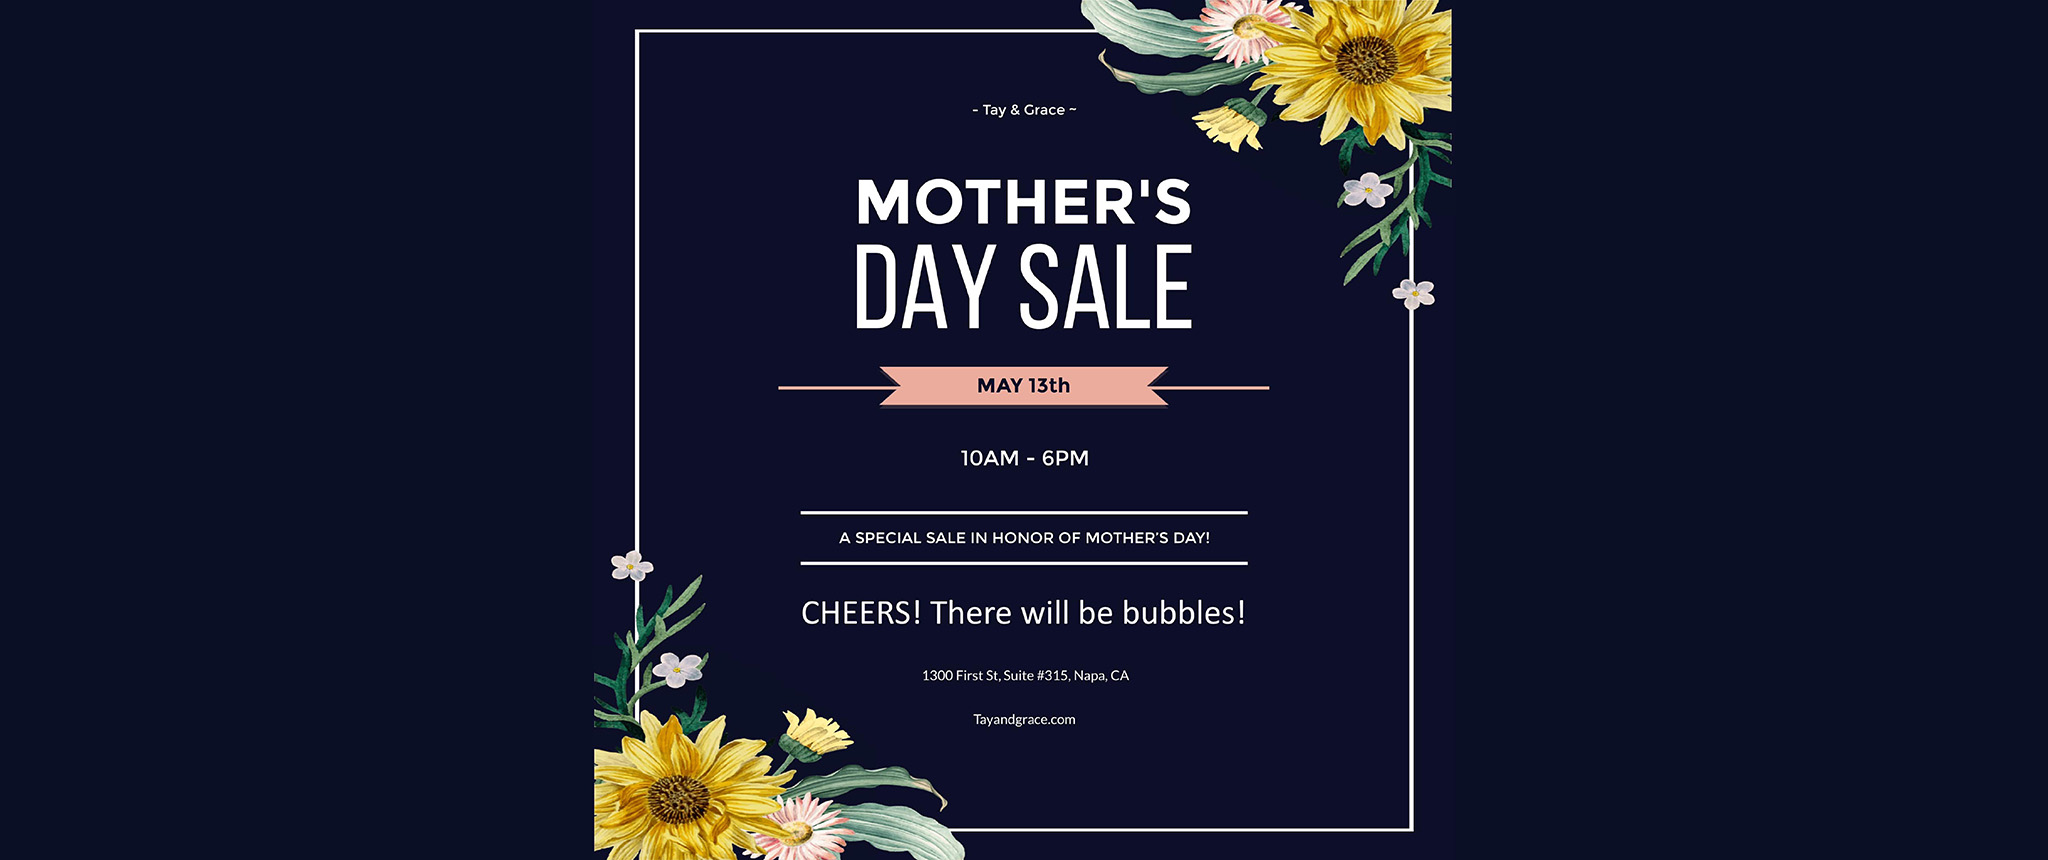 Tay & Grace Mother's Day Sale - First Street Napa